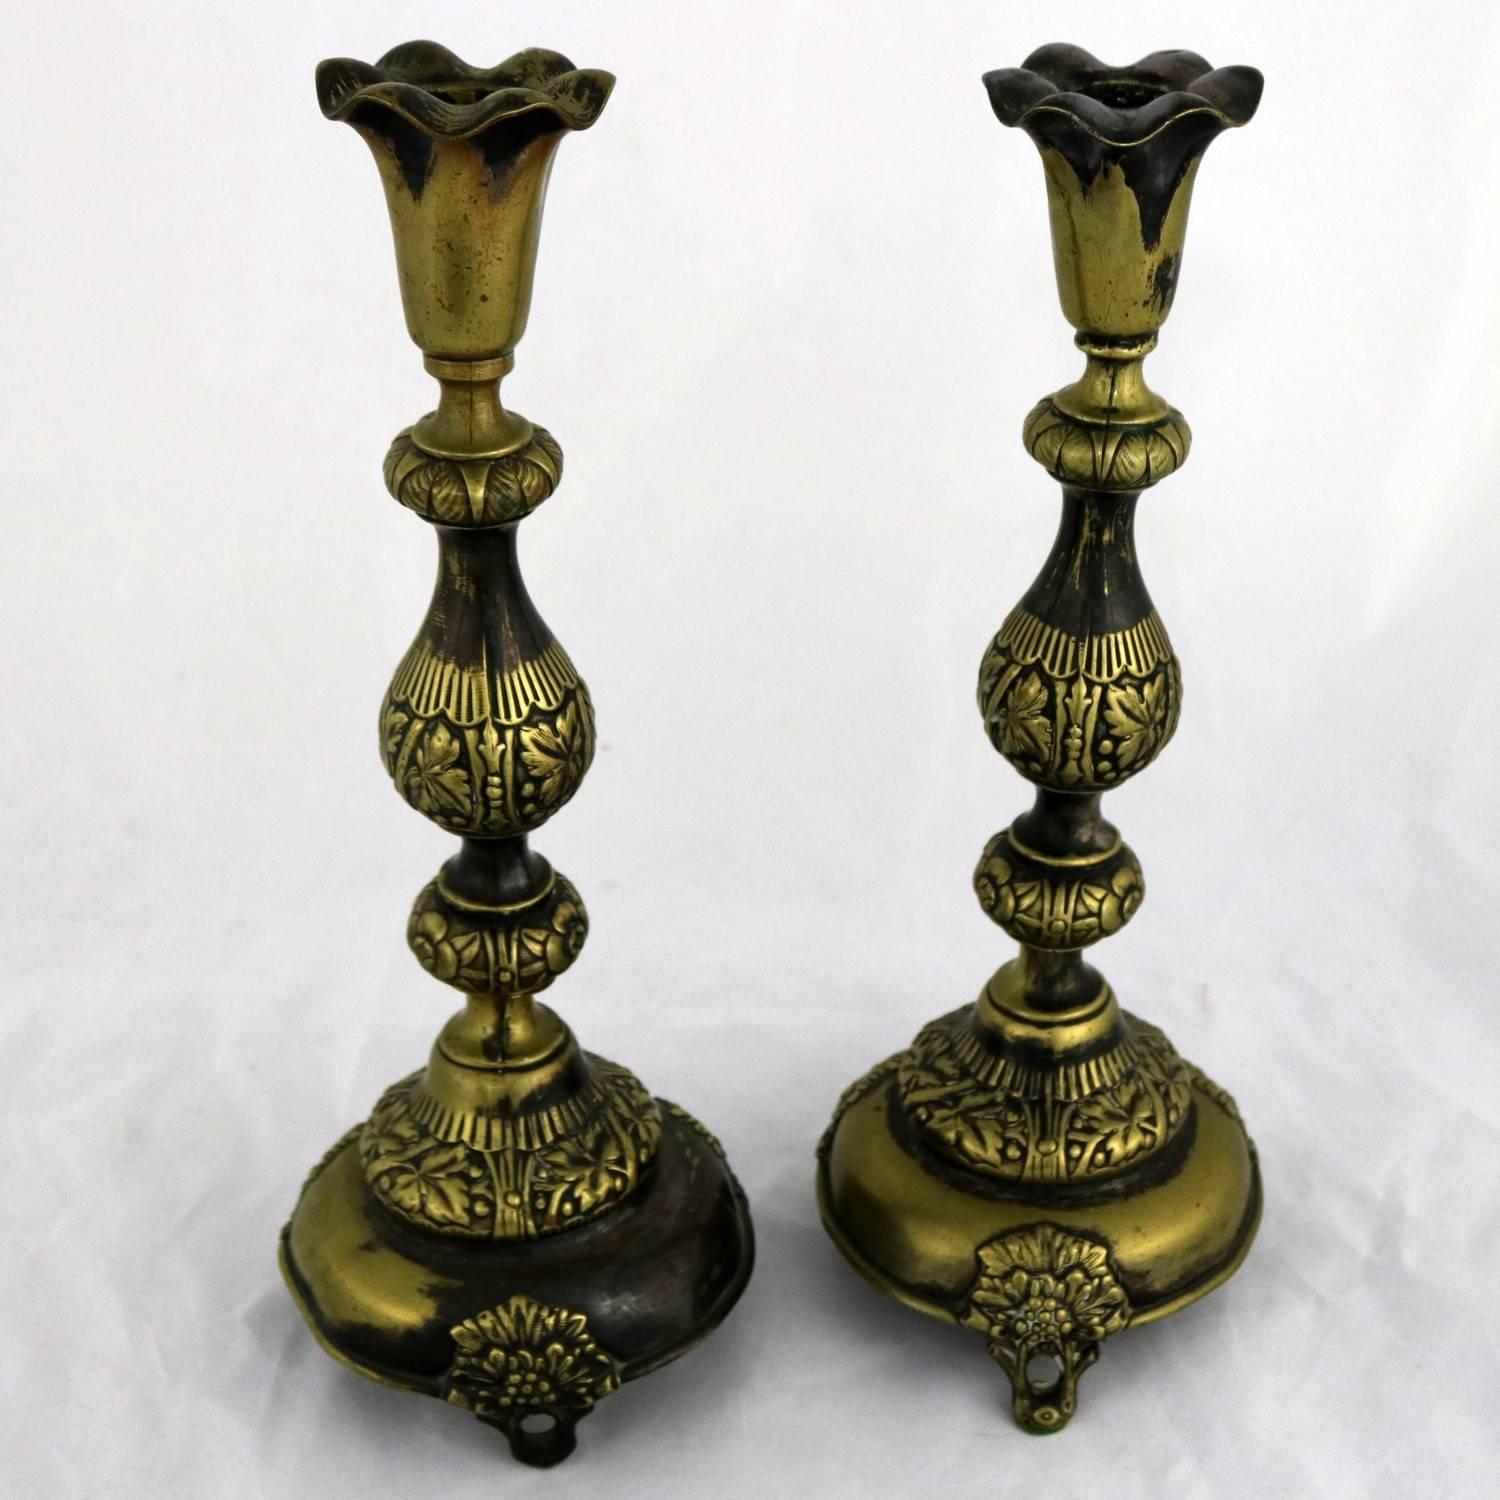 Beautiful pair of antique Judaica. These Sabbath candlesticks by Fraget N Plaque have a gorgeous distressing and age patina. They are dented and bent and cracked and most of the silver plate is off but they are fabulous in their distressing. Each is